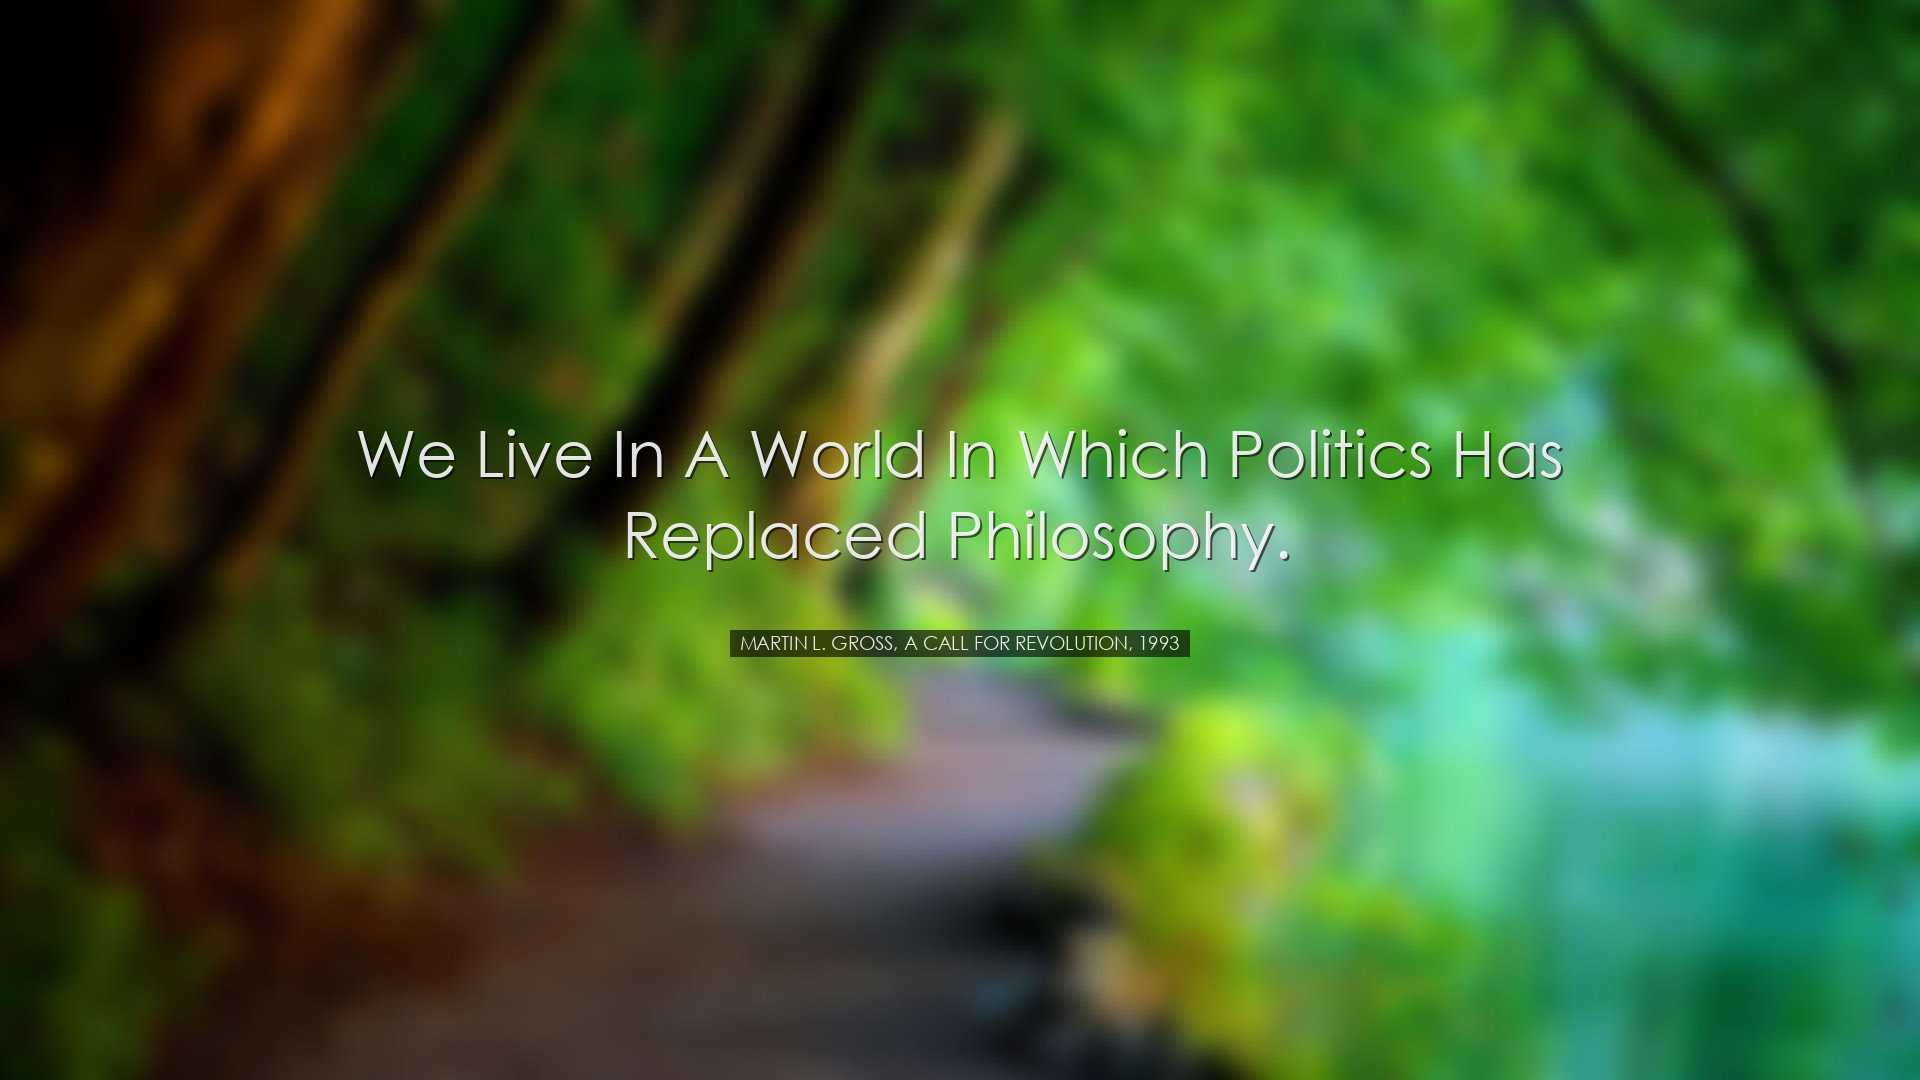 We live in a world in which politics has replaced philosophy. - Ma